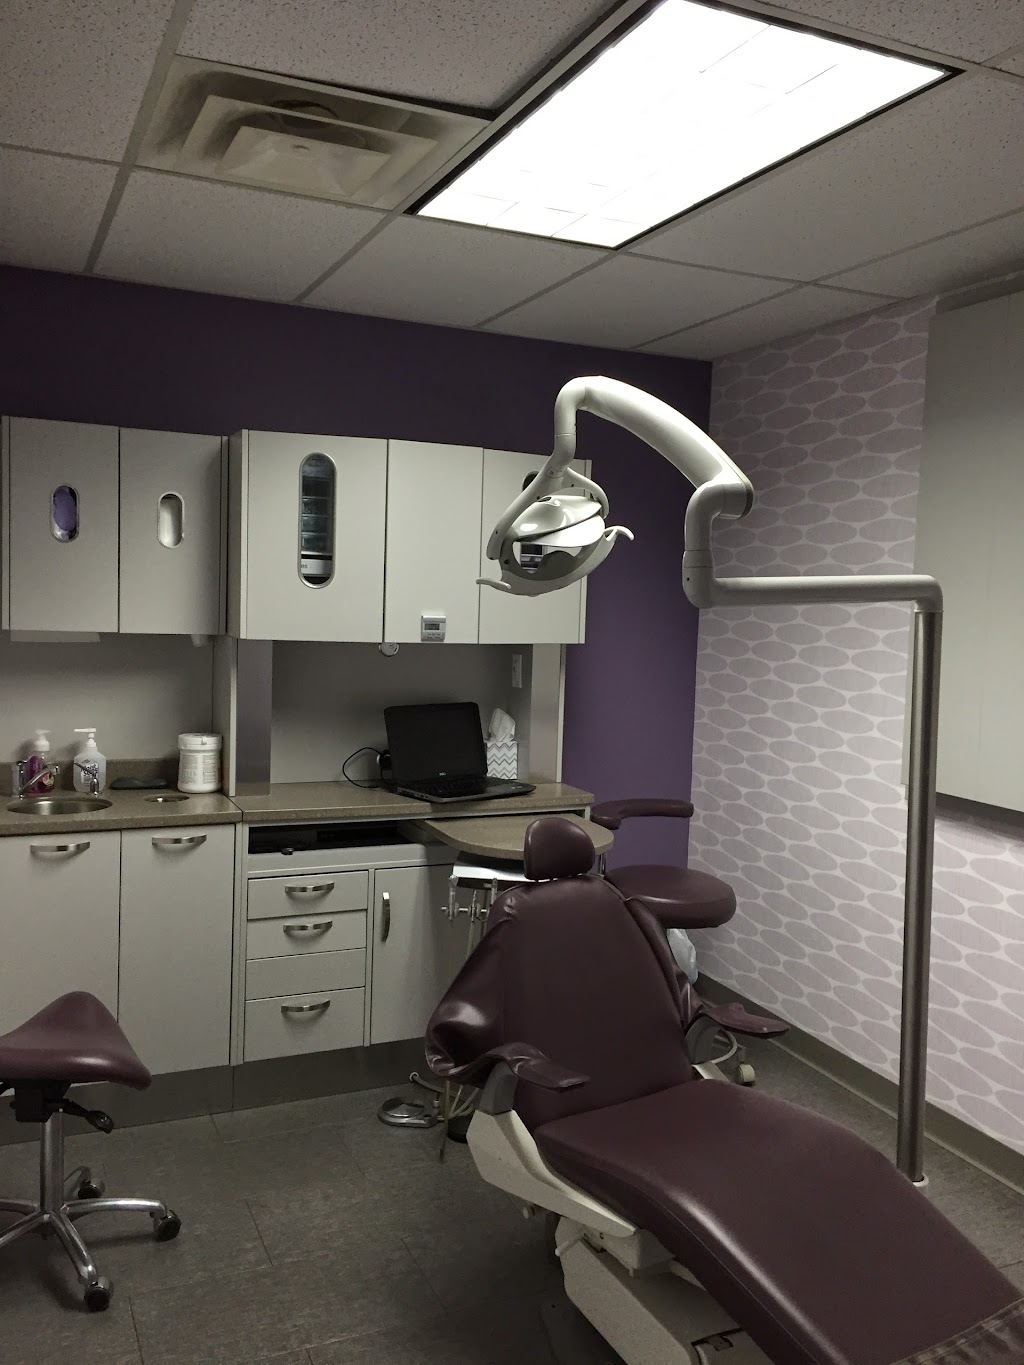 Heather J Petroff, DDS | 9000 Town Centre Dr, Broadview Heights, OH 44147, USA | Phone: (440) 838-4480